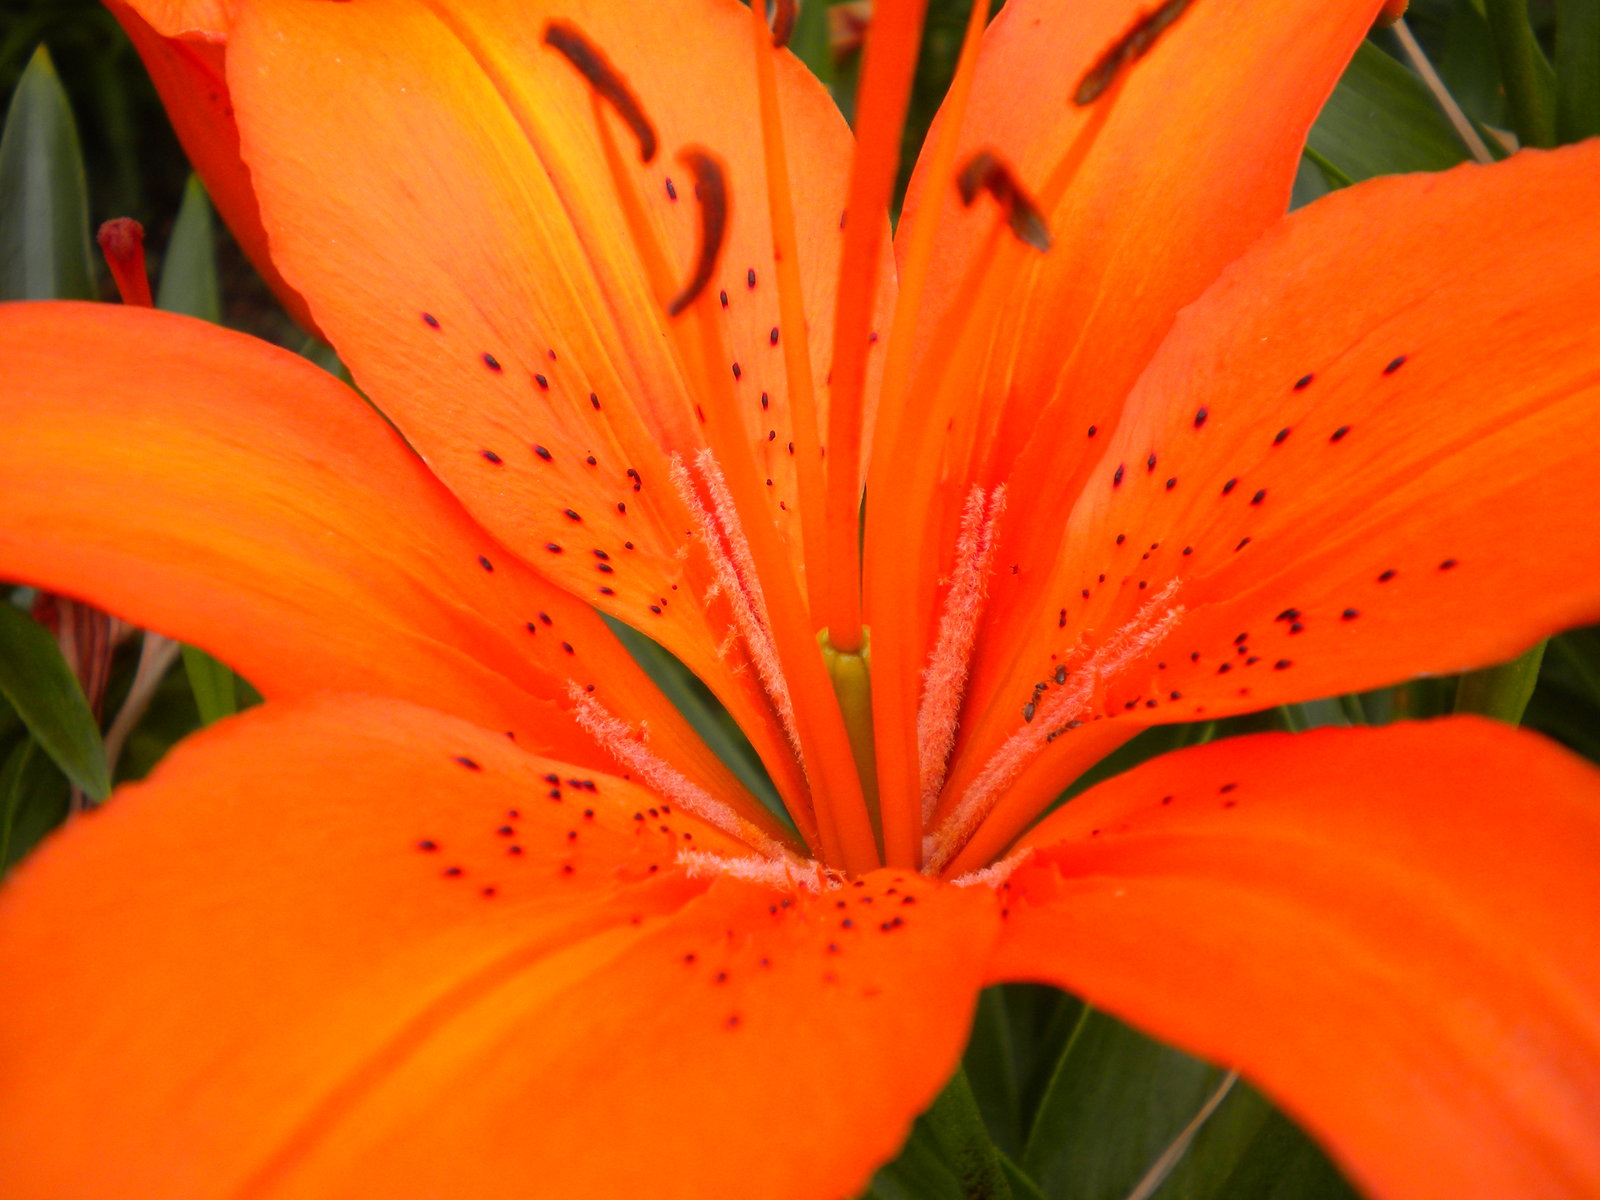 tiger lily flower backgrounds